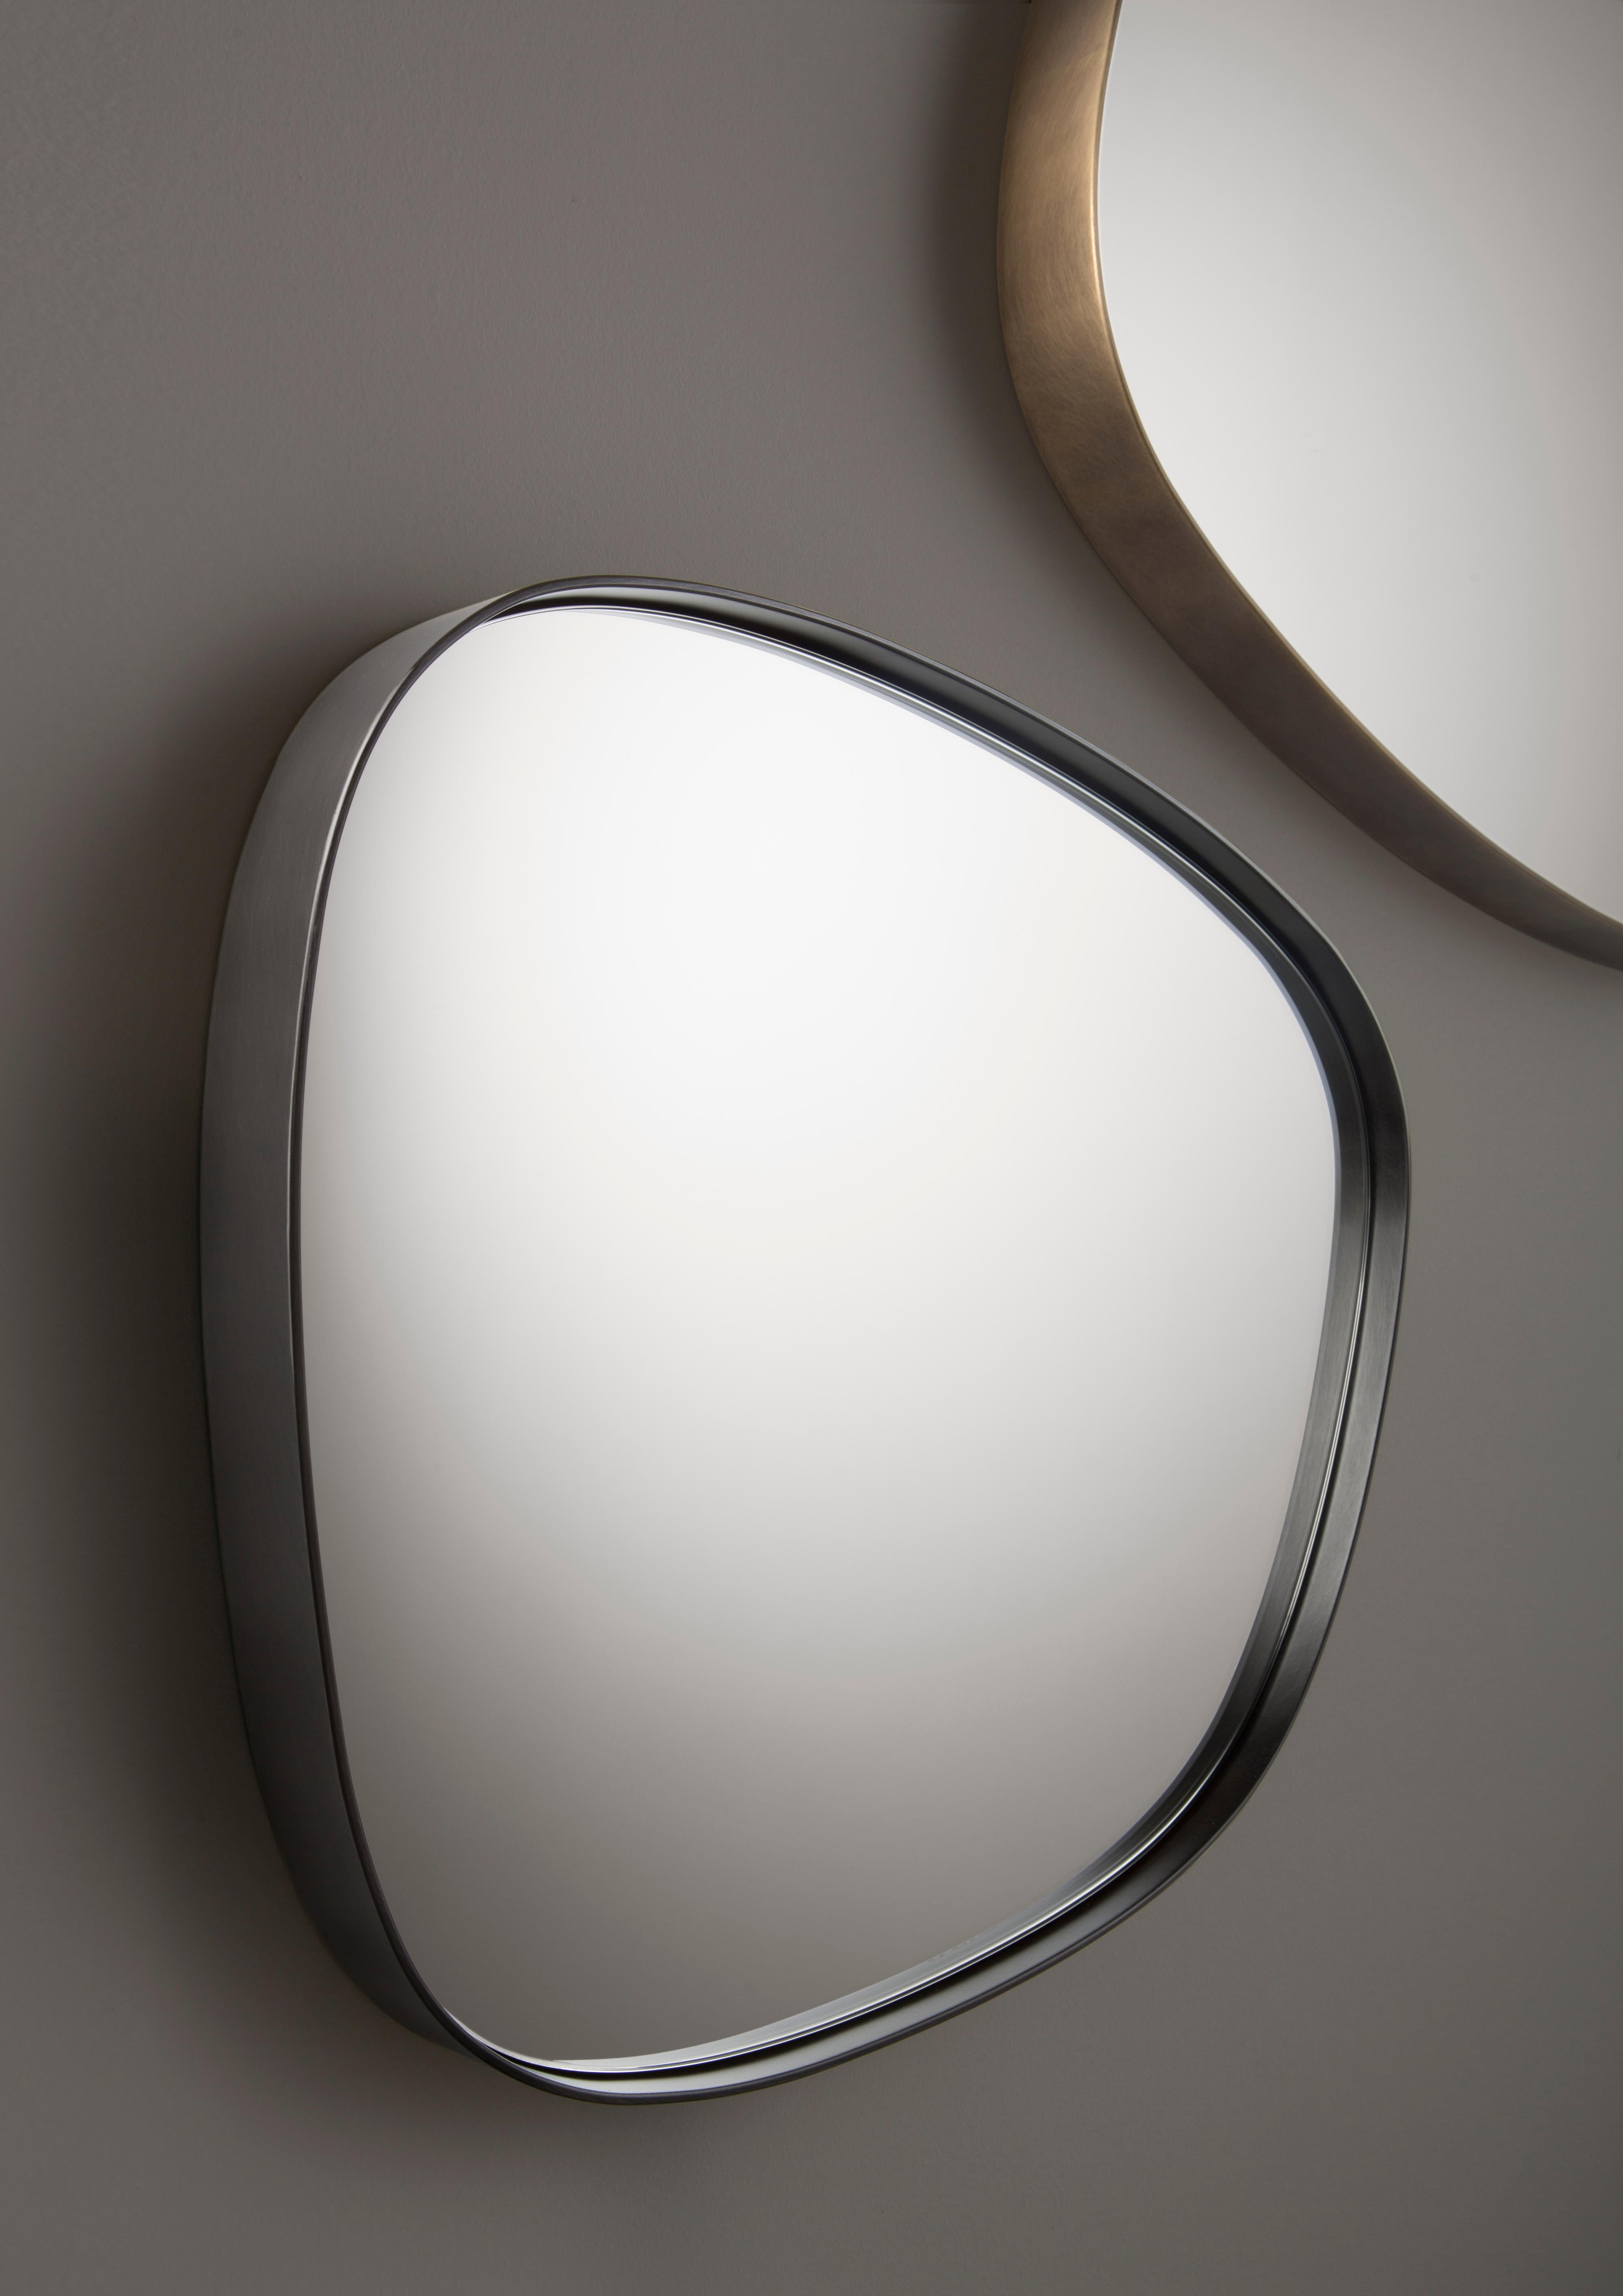 Modern DeCastelli Syro 56 Mirror in Stainless Steel Frame by Emilio Nanni For Sale